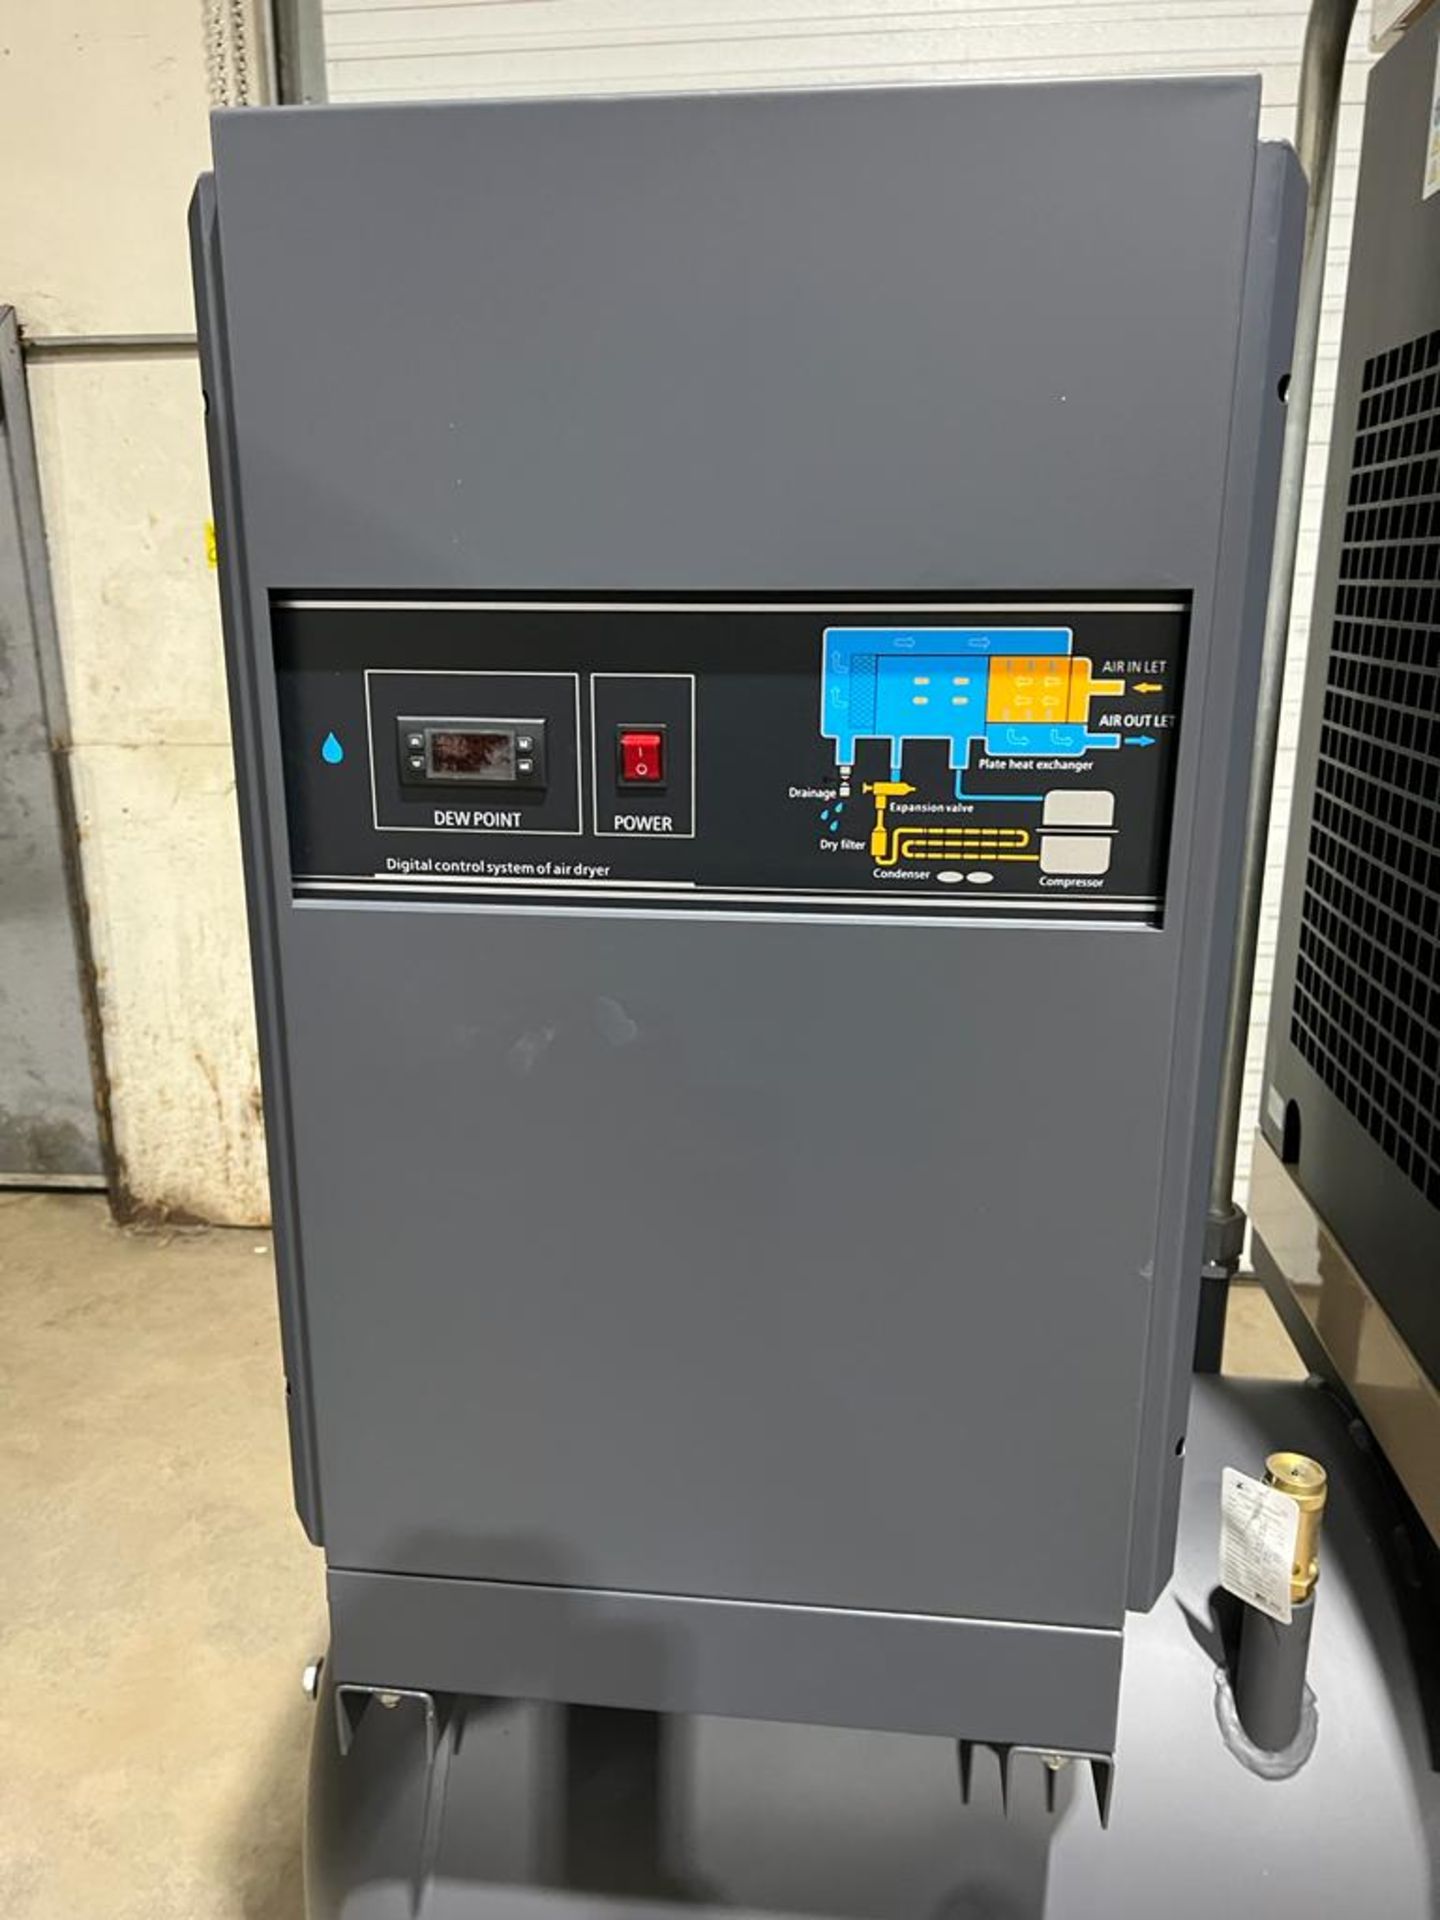 Pneu-Airtec model 30FF - 30HP Air Compressor with built on DRYER - MINT UNUSED COMPRESSOR with - Image 3 of 4